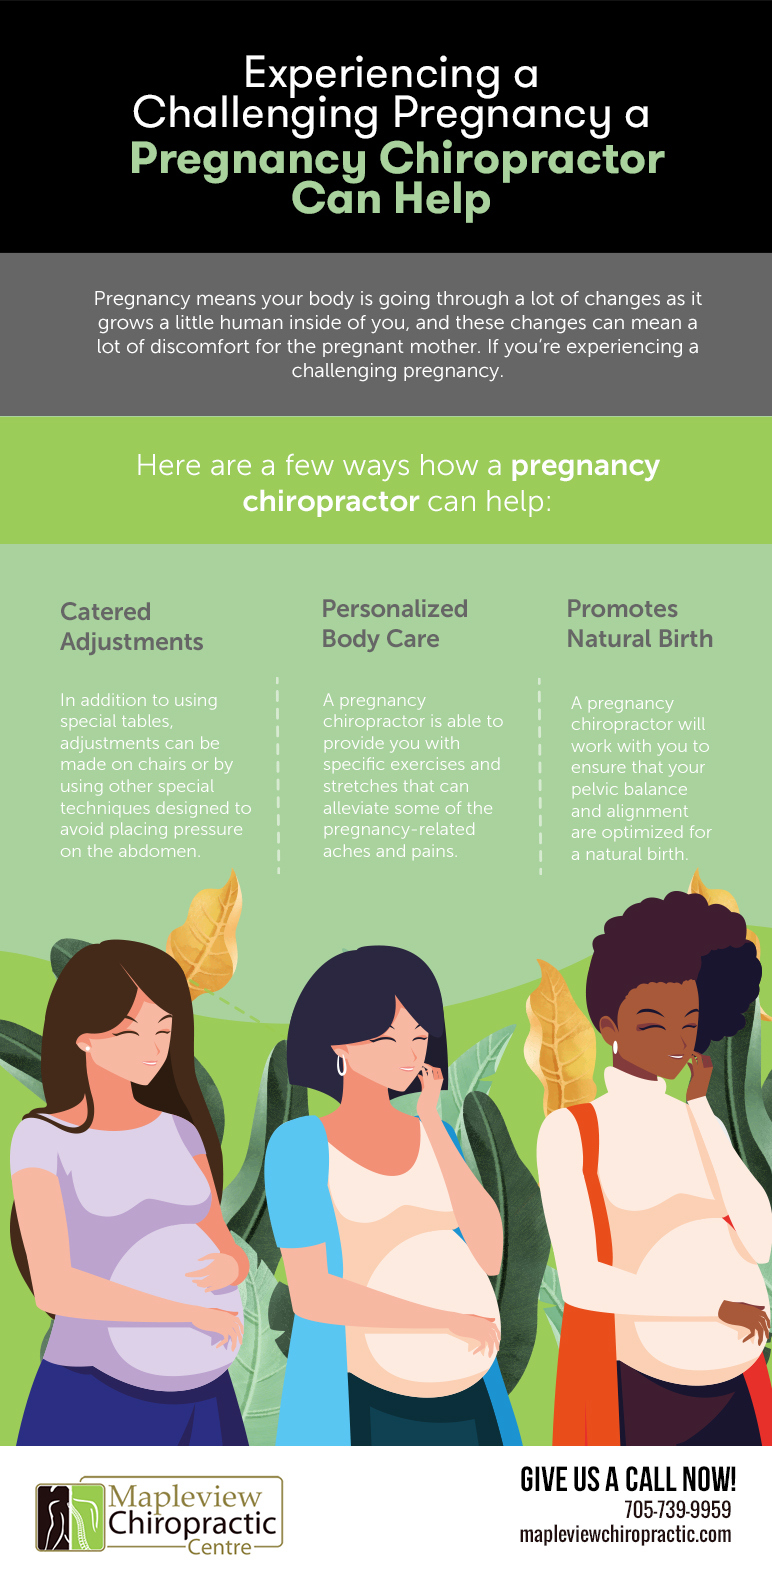 Experiencing a Challenging Pregnancy? A Pregnancy Chiropractor Can Help